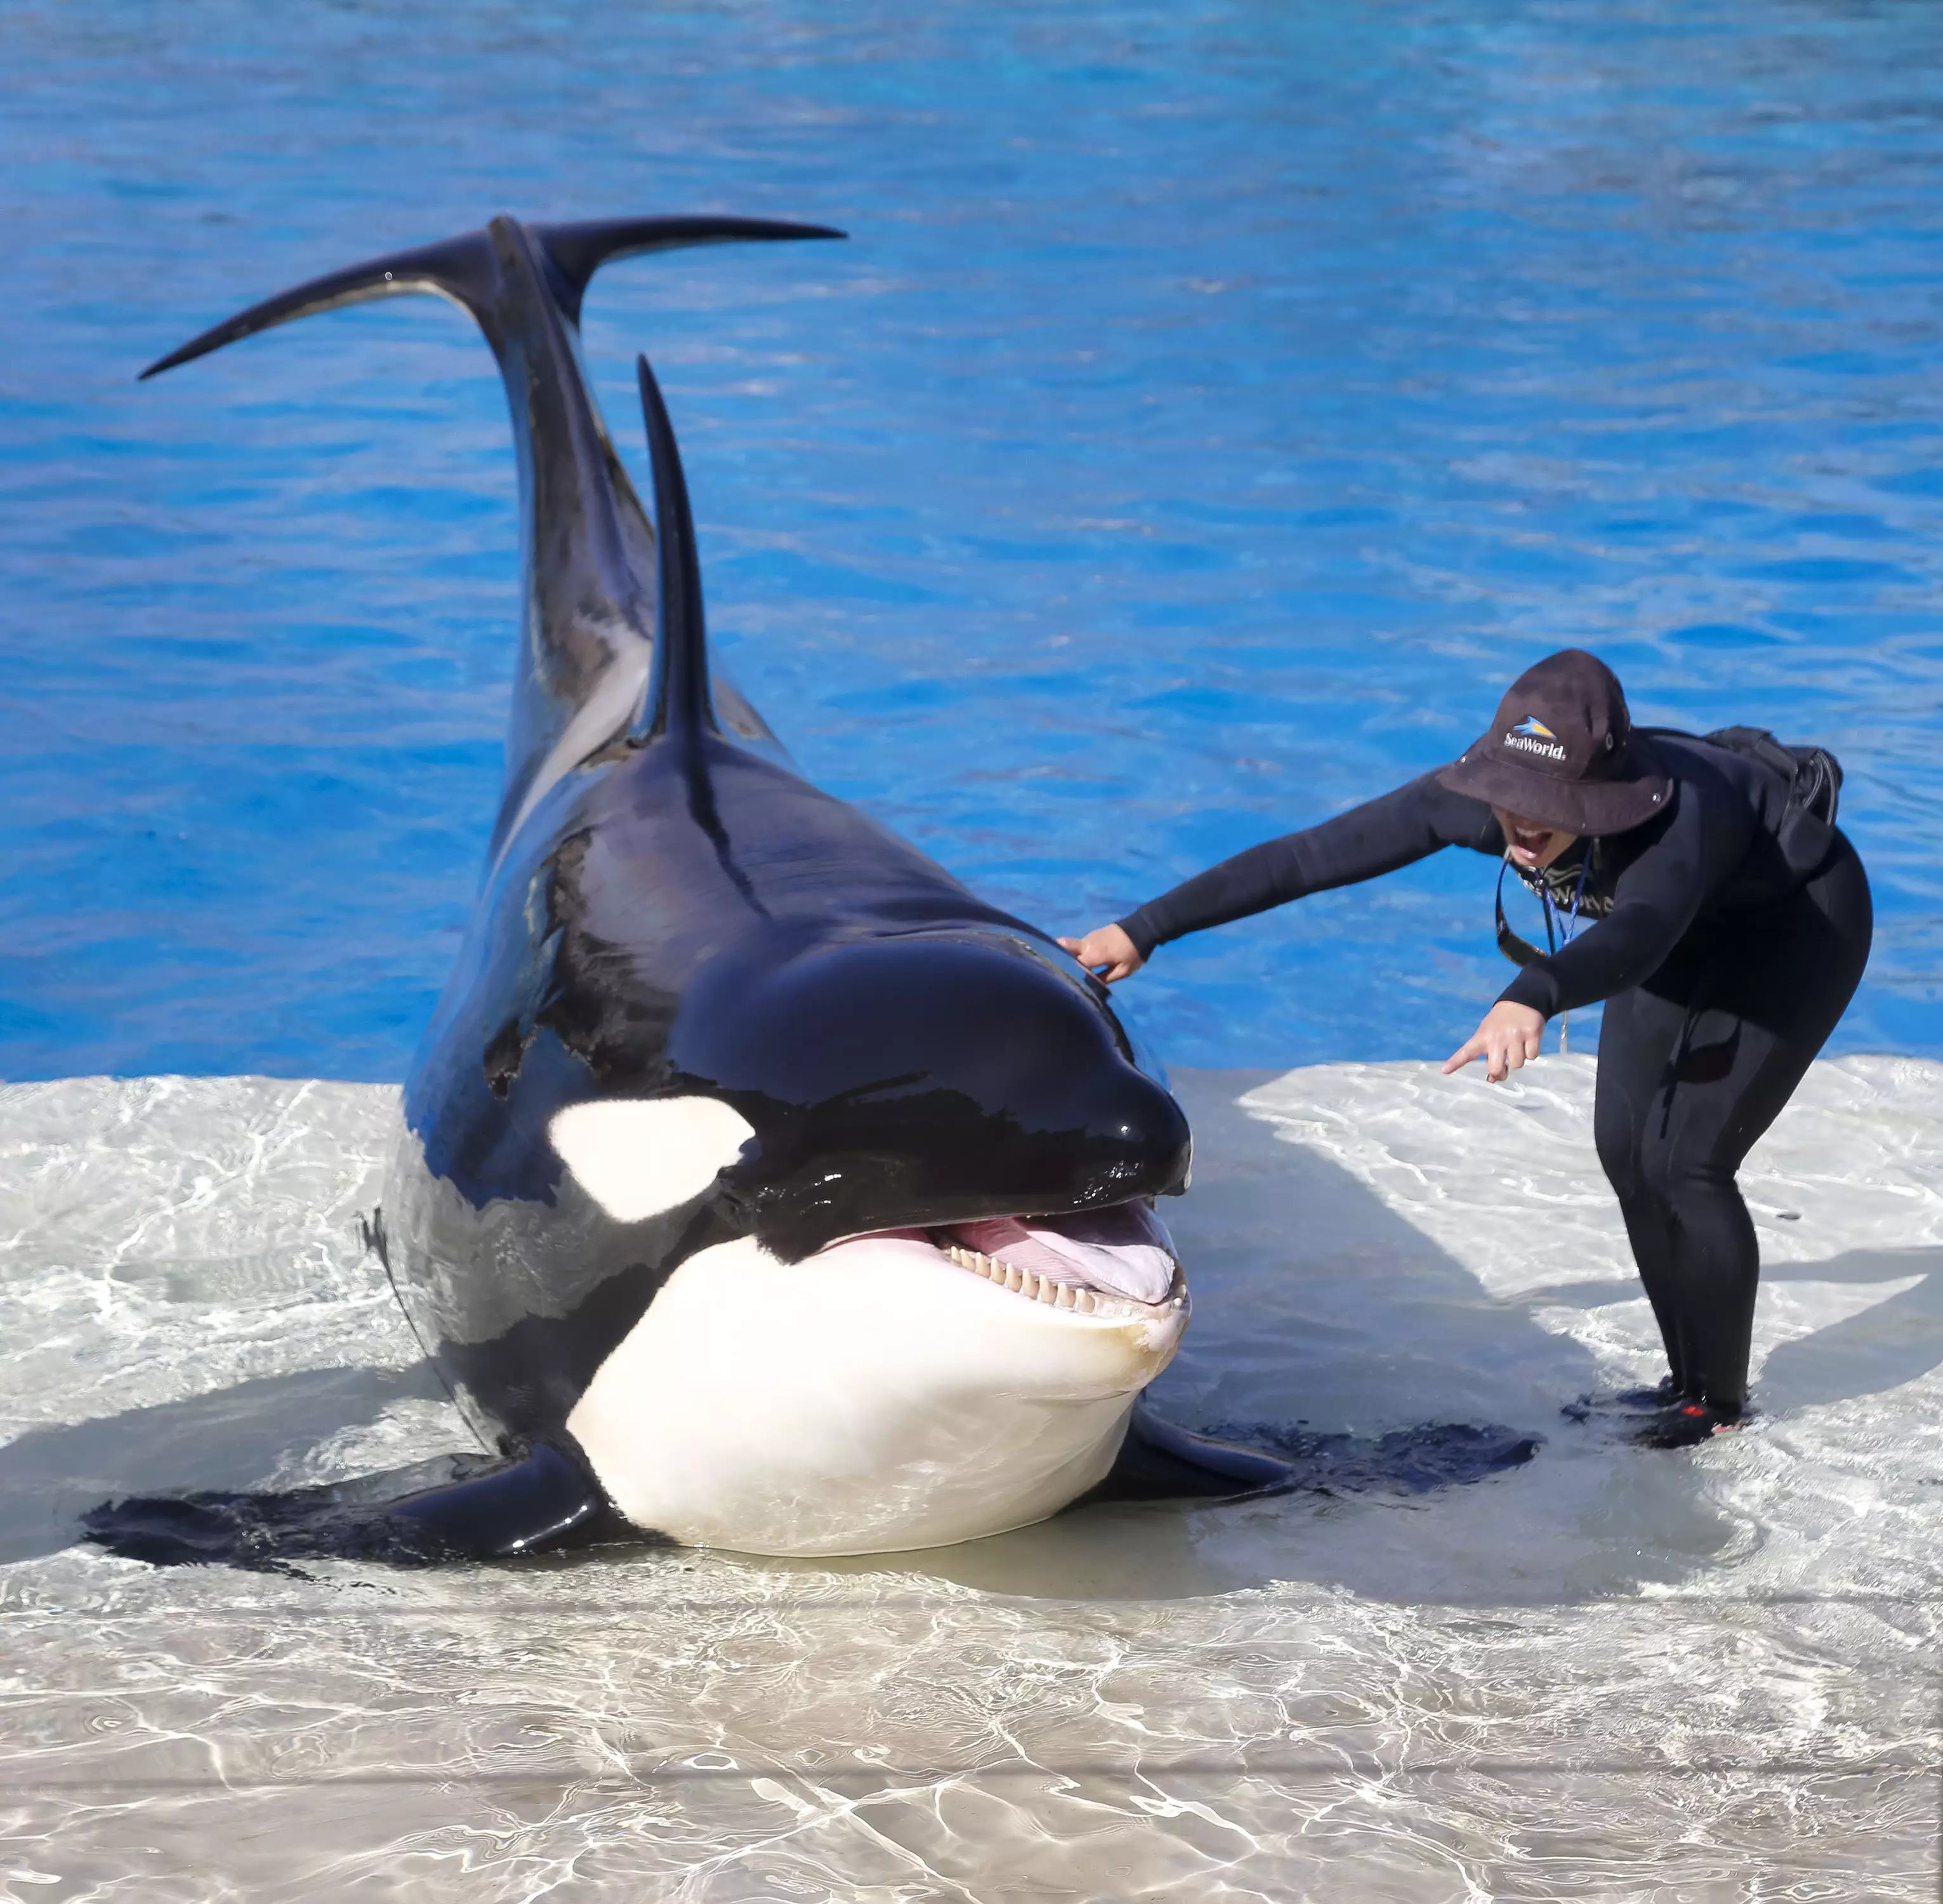 SeaWorld is in the process of phasing out orca use at its parks.